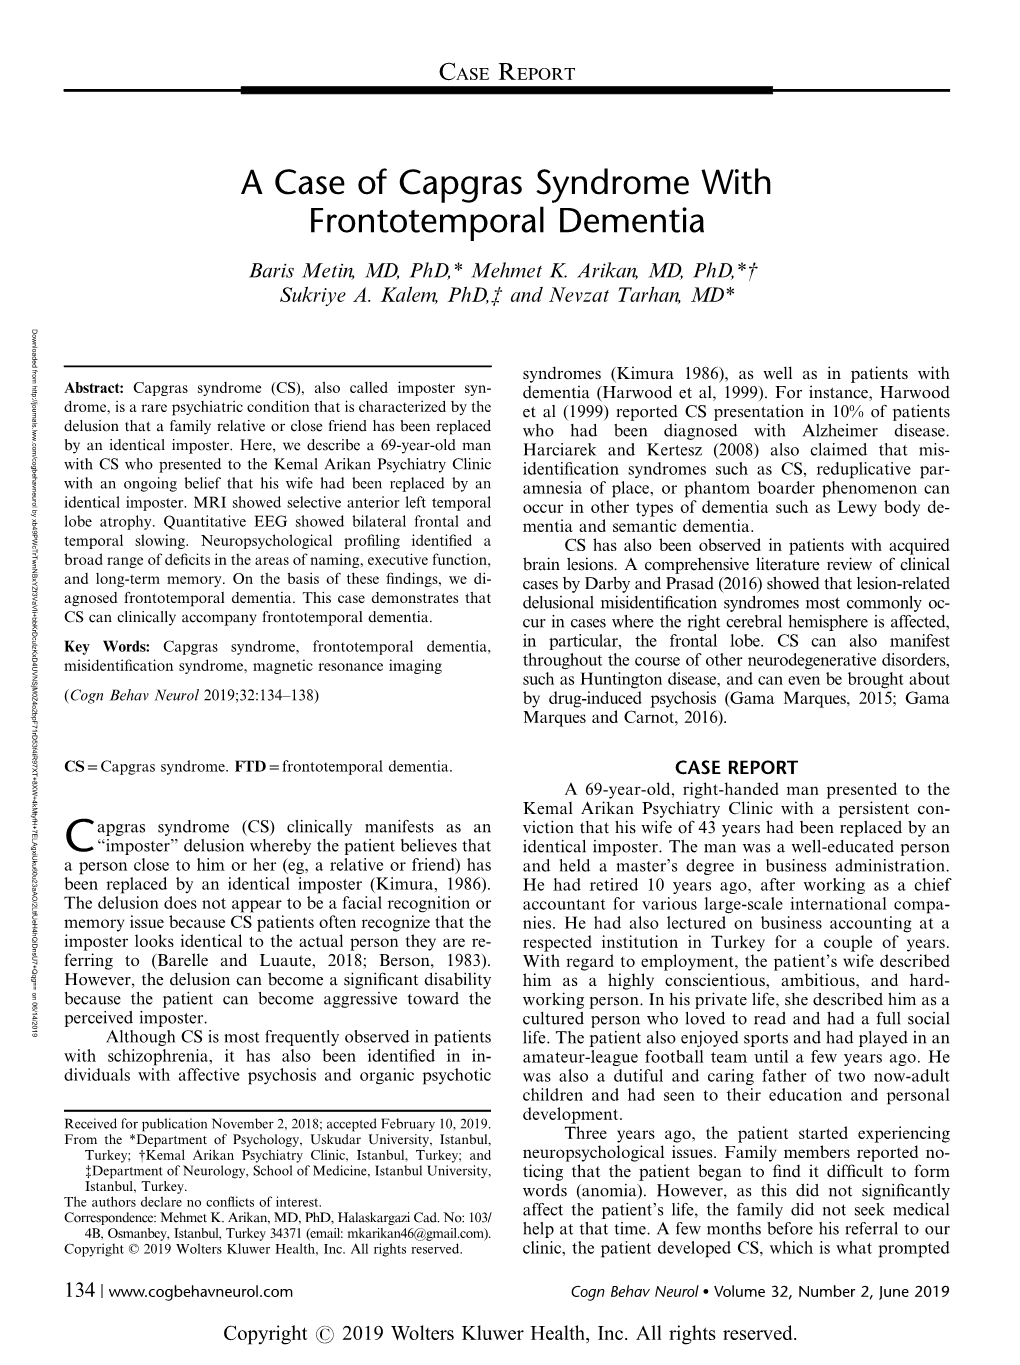 A Case of Capgras Syndrome with Frontotemporal Dementia